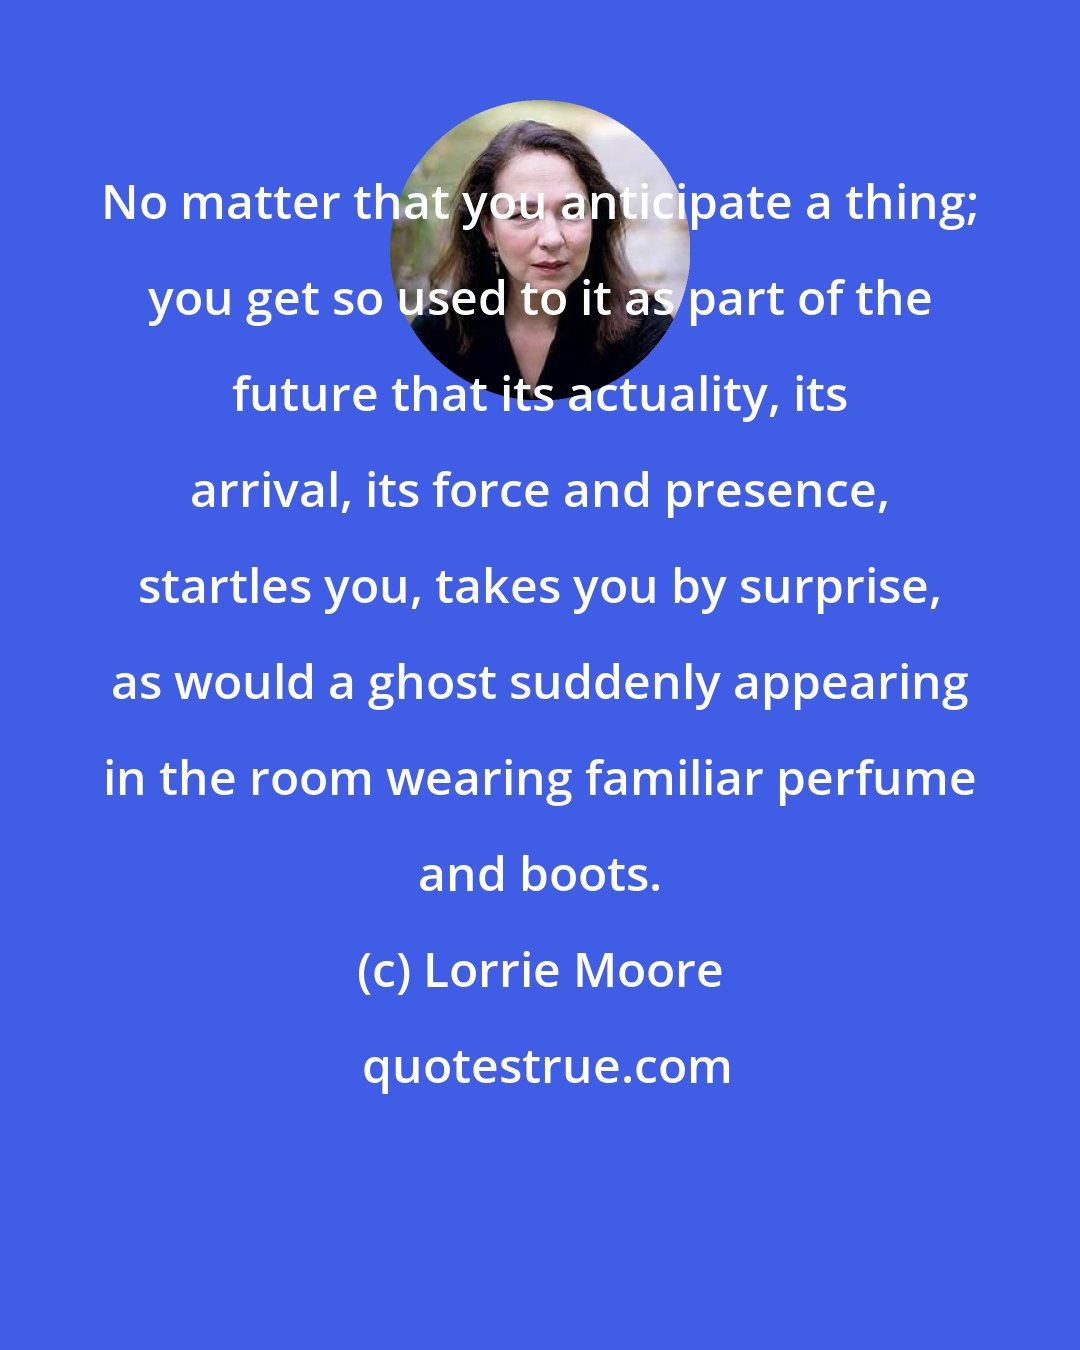 Lorrie Moore: No matter that you anticipate a thing; you get so used to it as part of the future that its actuality, its arrival, its force and presence, startles you, takes you by surprise, as would a ghost suddenly appearing in the room wearing familiar perfume and boots.